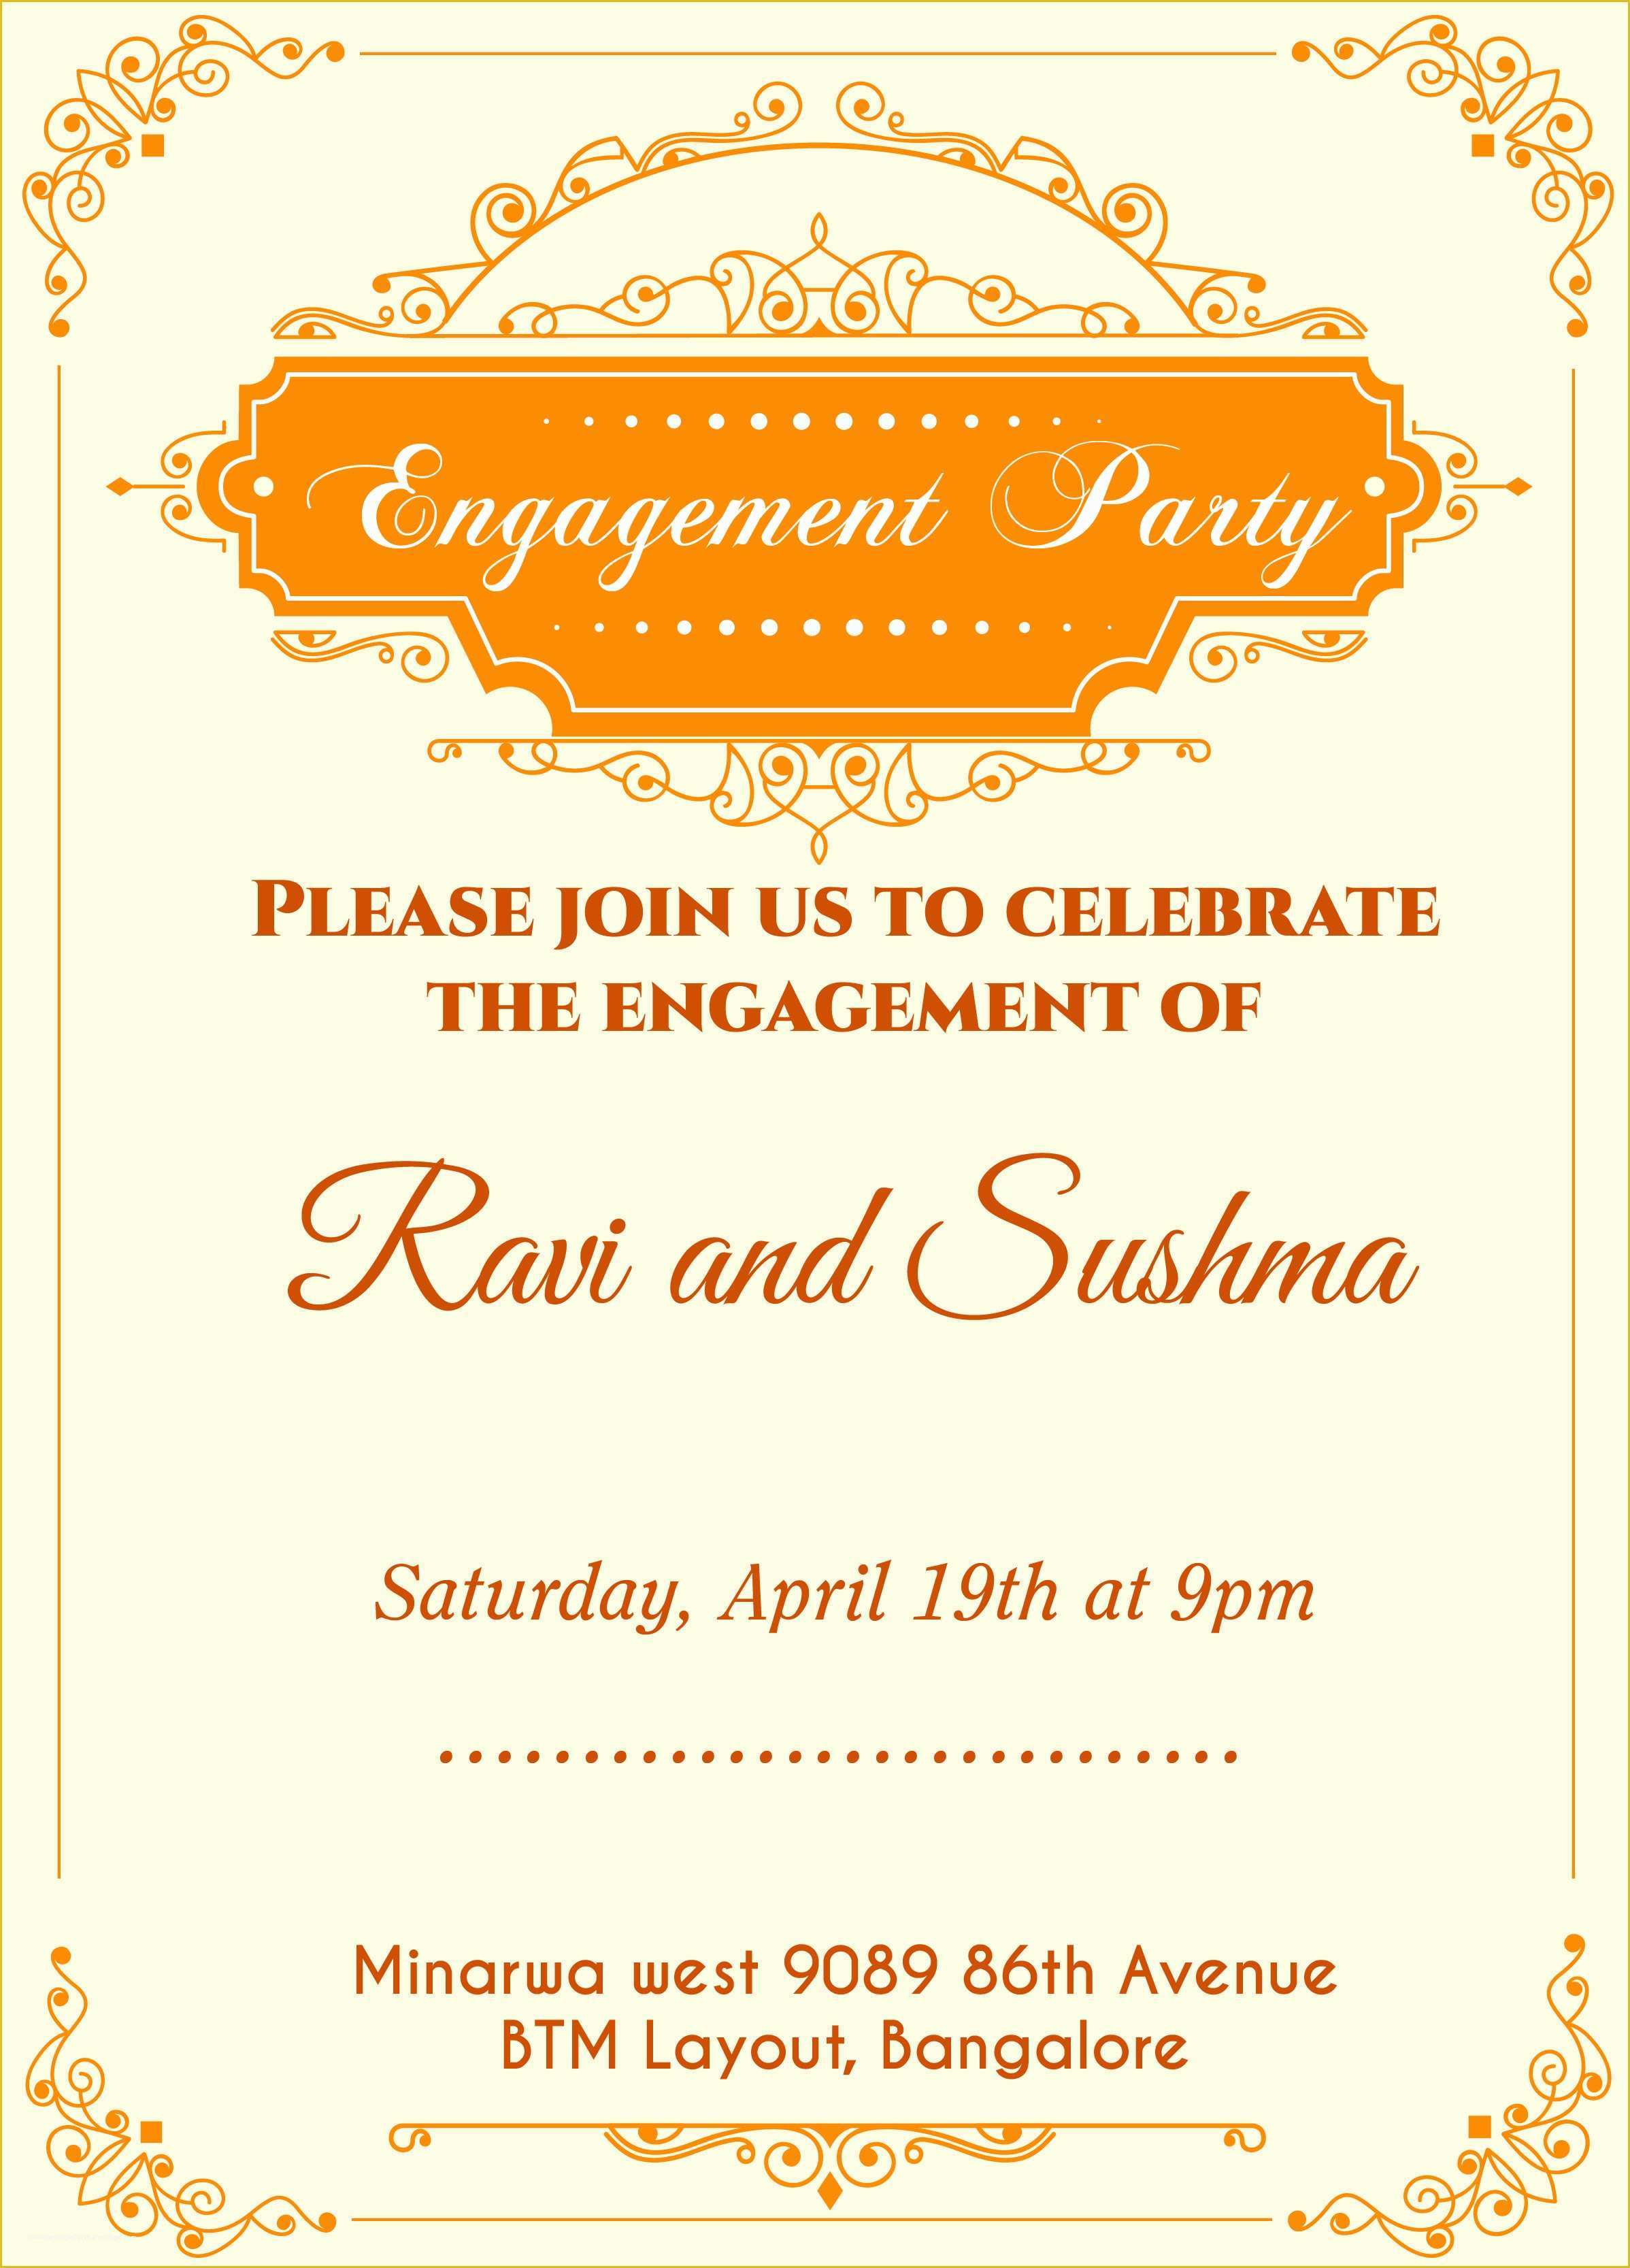 Indian Engagement Invitation Cards Templates Free Download Of Indian Engagement Invitation Card with Wordings Check It